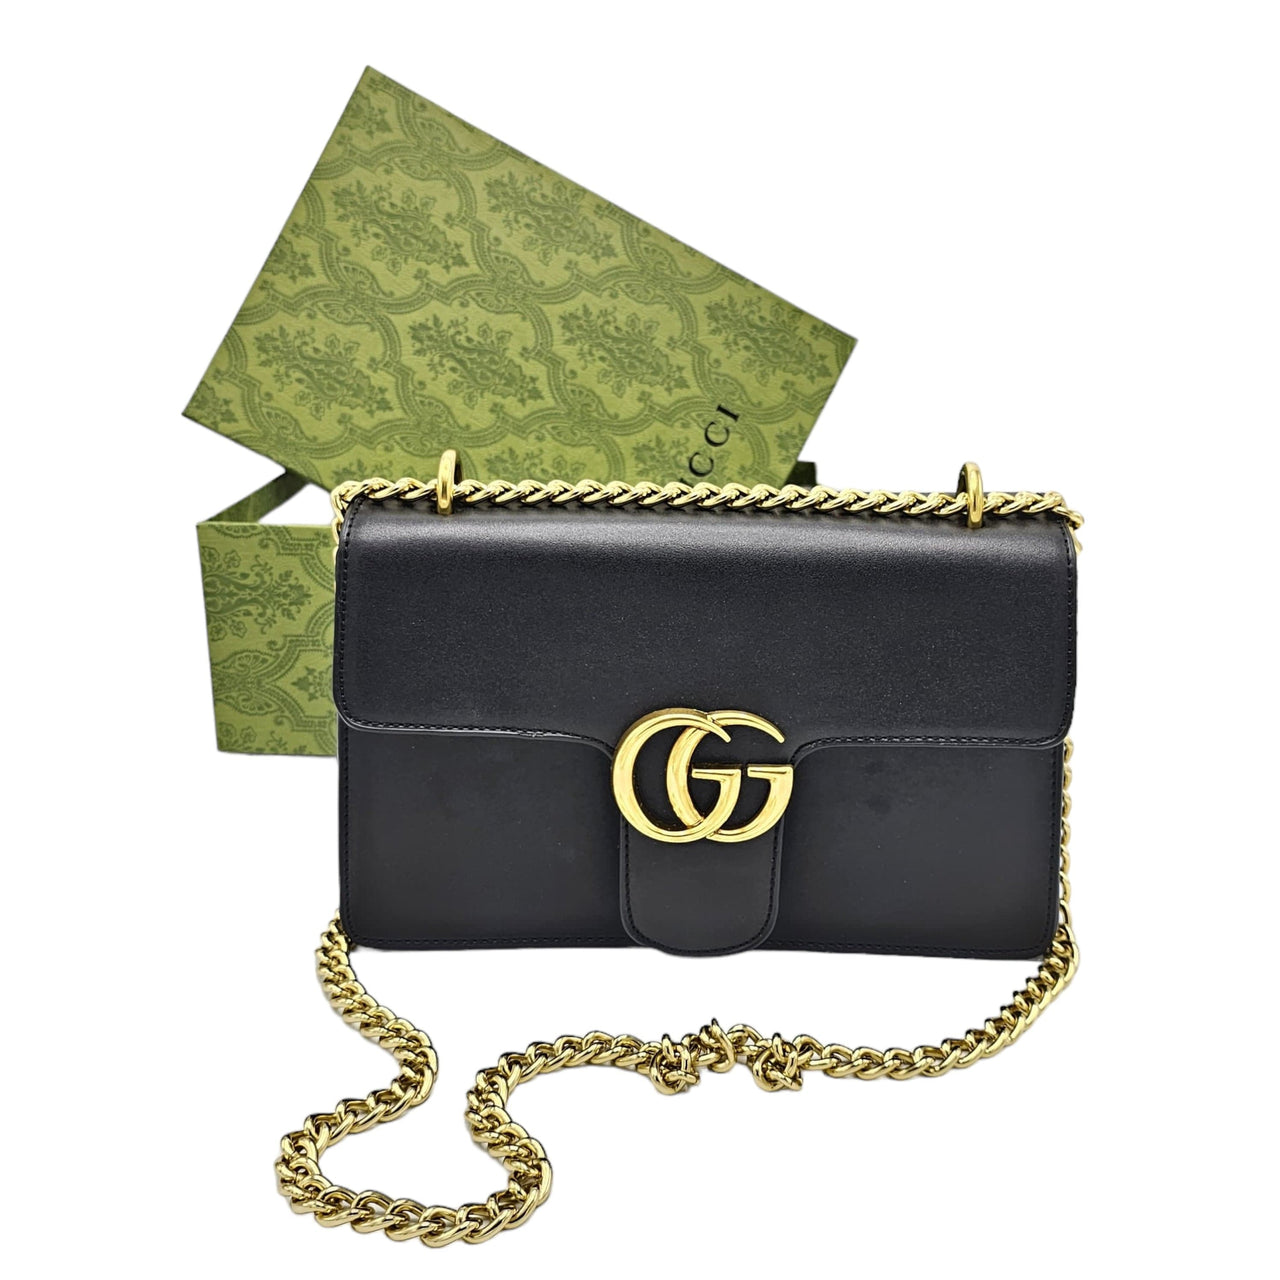 The Bag Couture Handbags, Wallets & Cases Gucci GG Marmont Chain Shoulder / Crossbody Bag Black